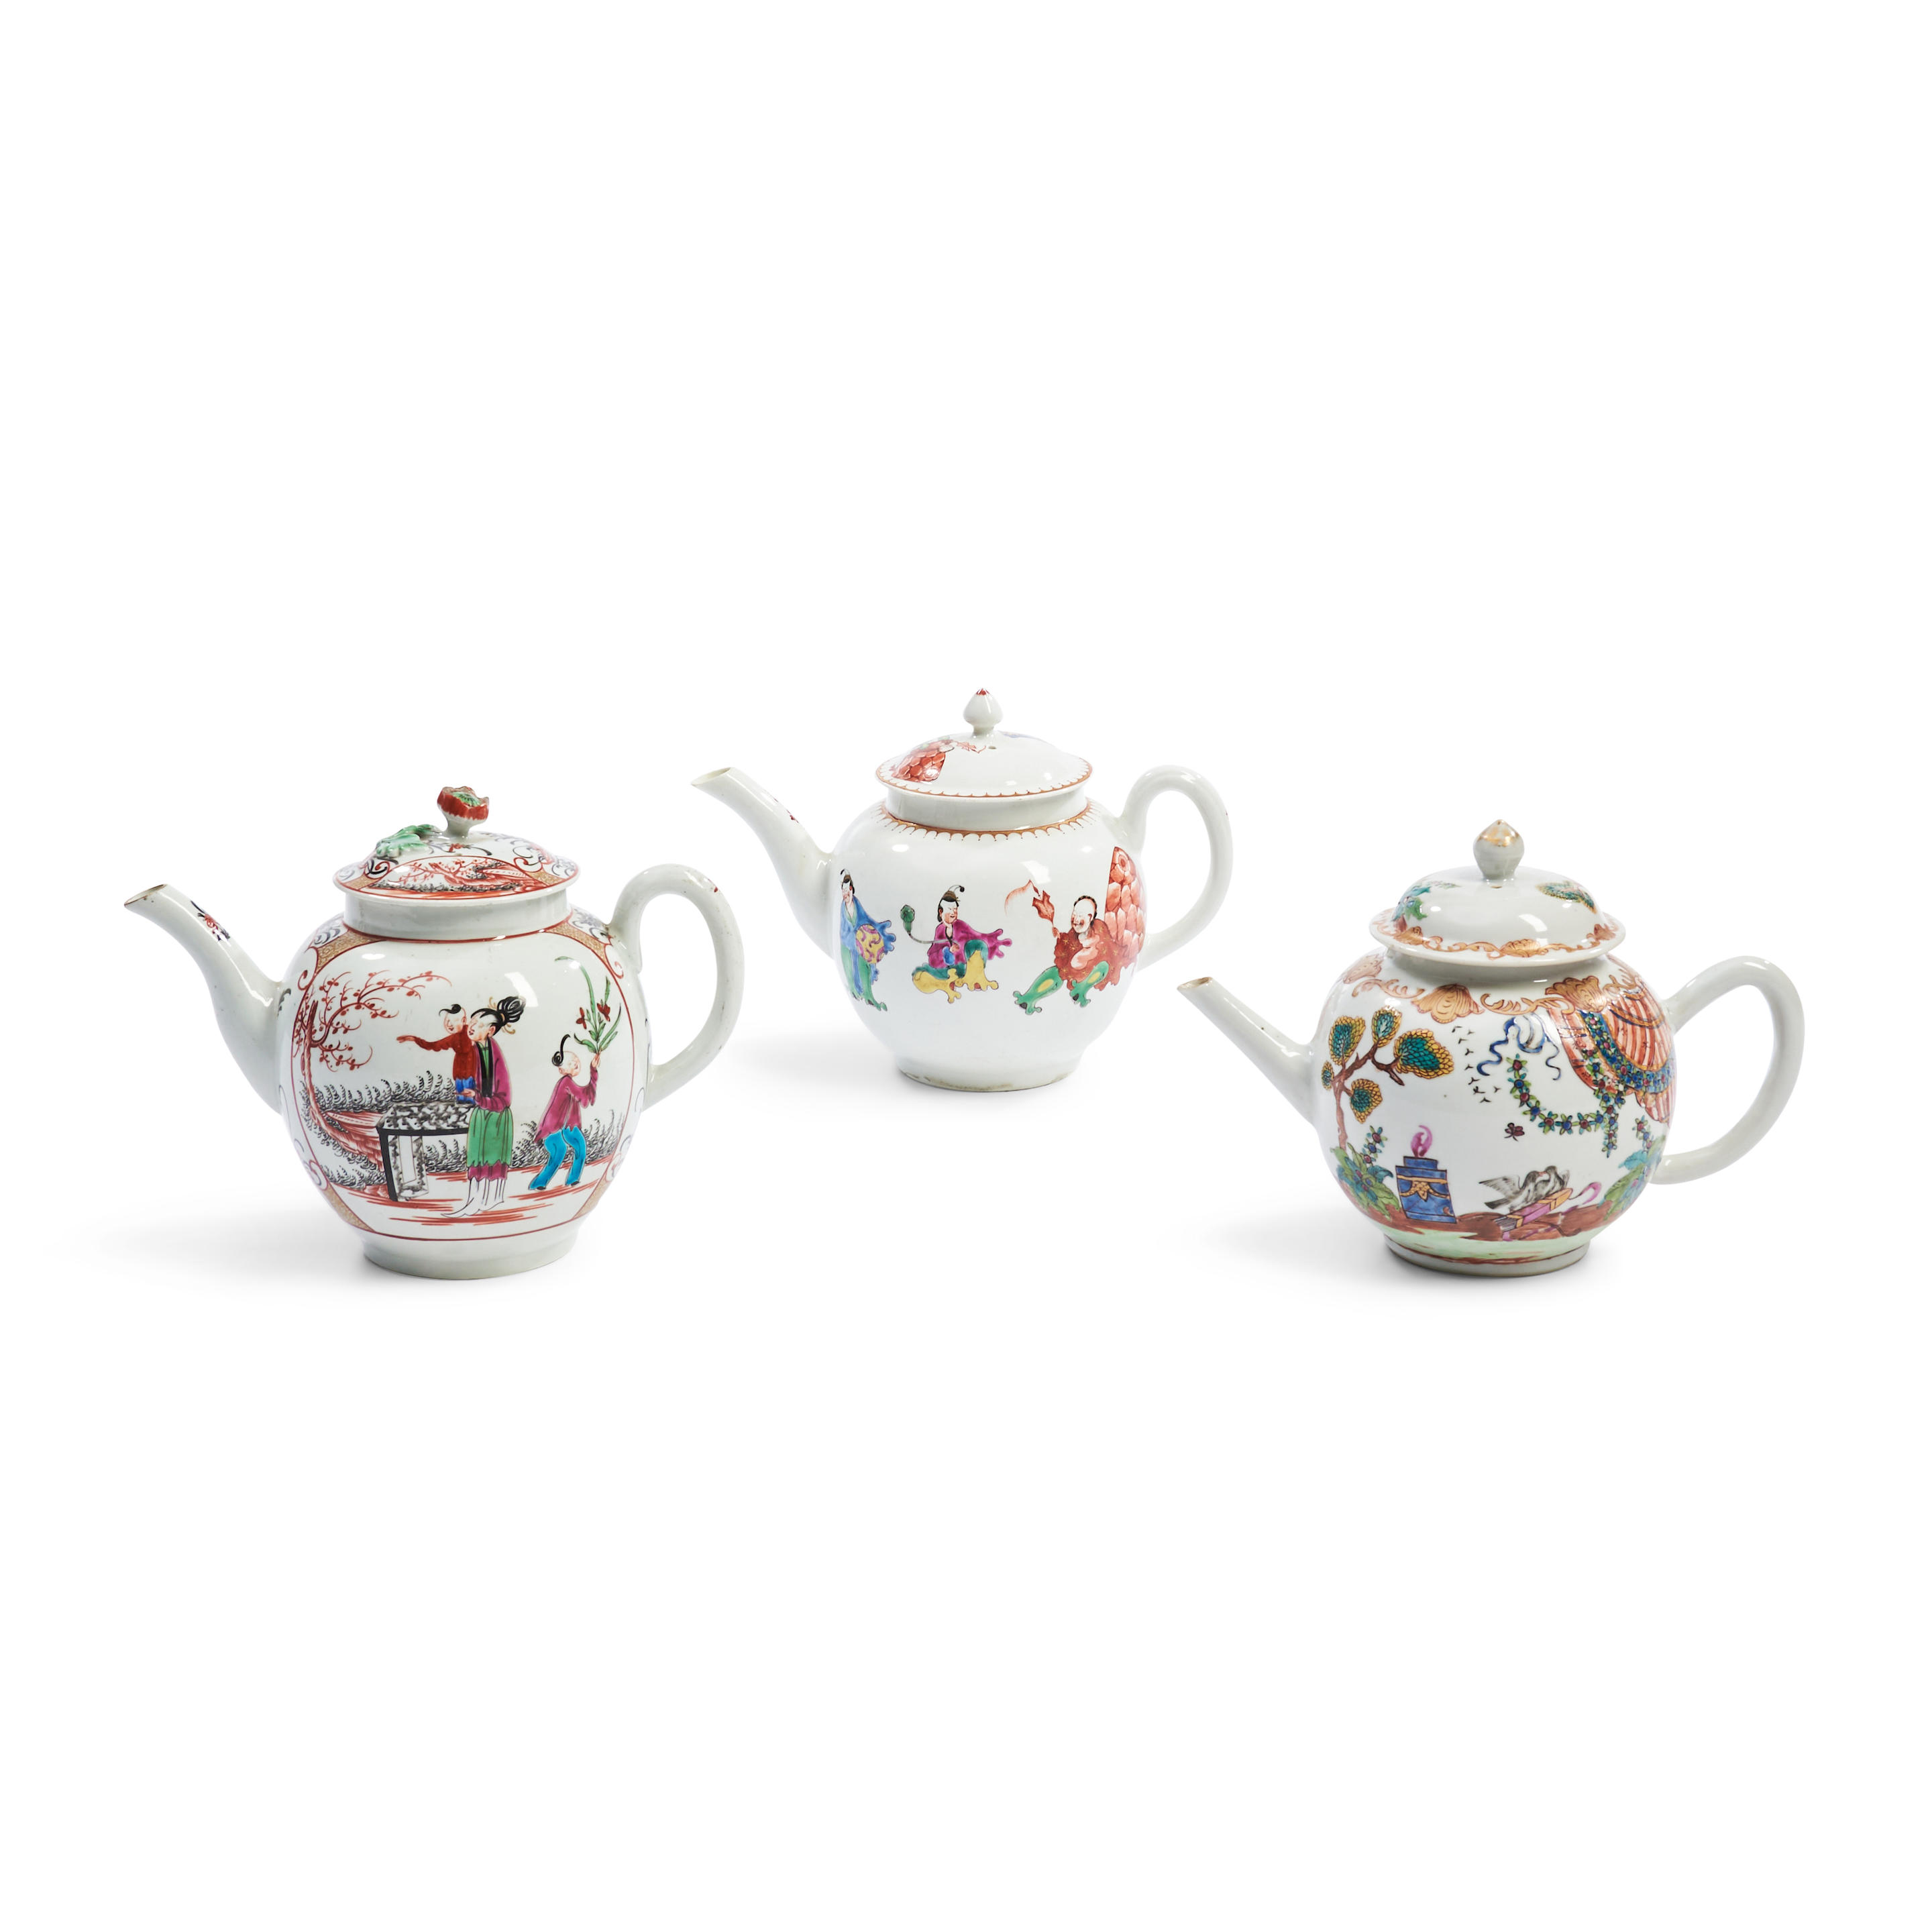 THREE PORCELAIN TEAPOTS AND COVERS  3ae8be